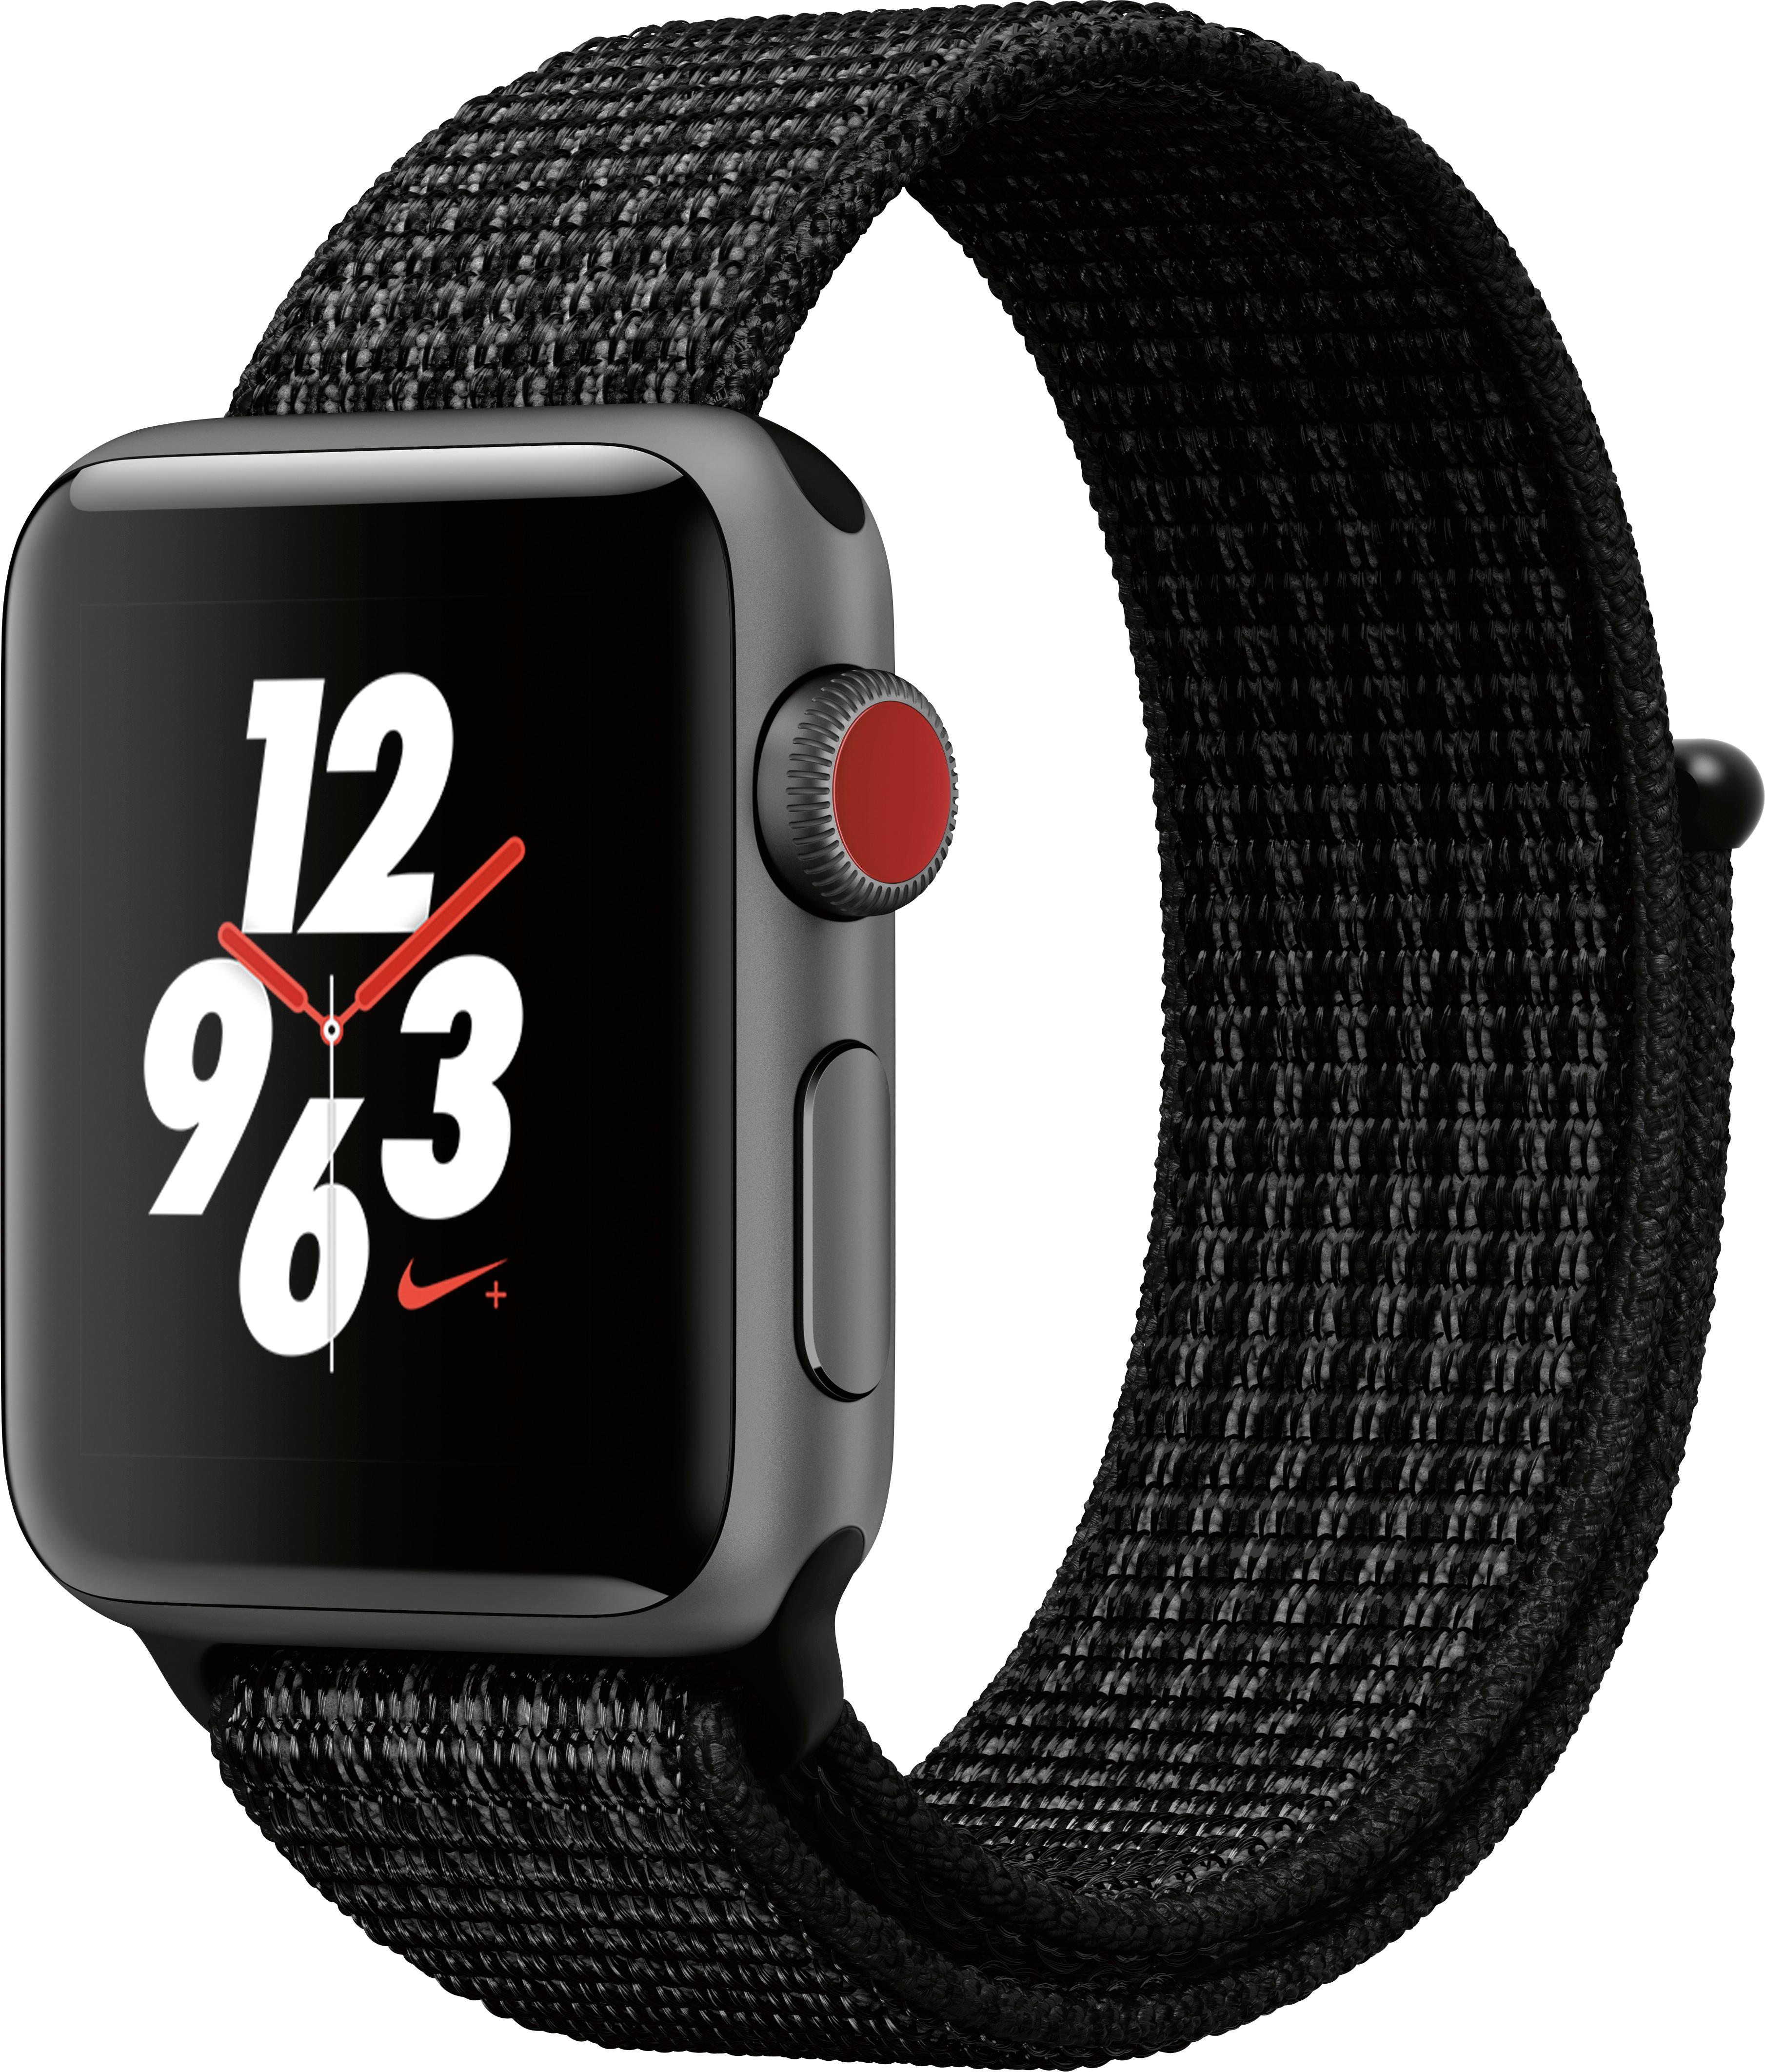 Narabar Bungalow dele Best Buy: Apple Watch Nike+ Series 3 (GPS + Cellular) 38mm Space Gray  Aluminum Case with Black/Pure Platinum Nike Sport Loop Space Gray Aluminum  MQL82LL/A